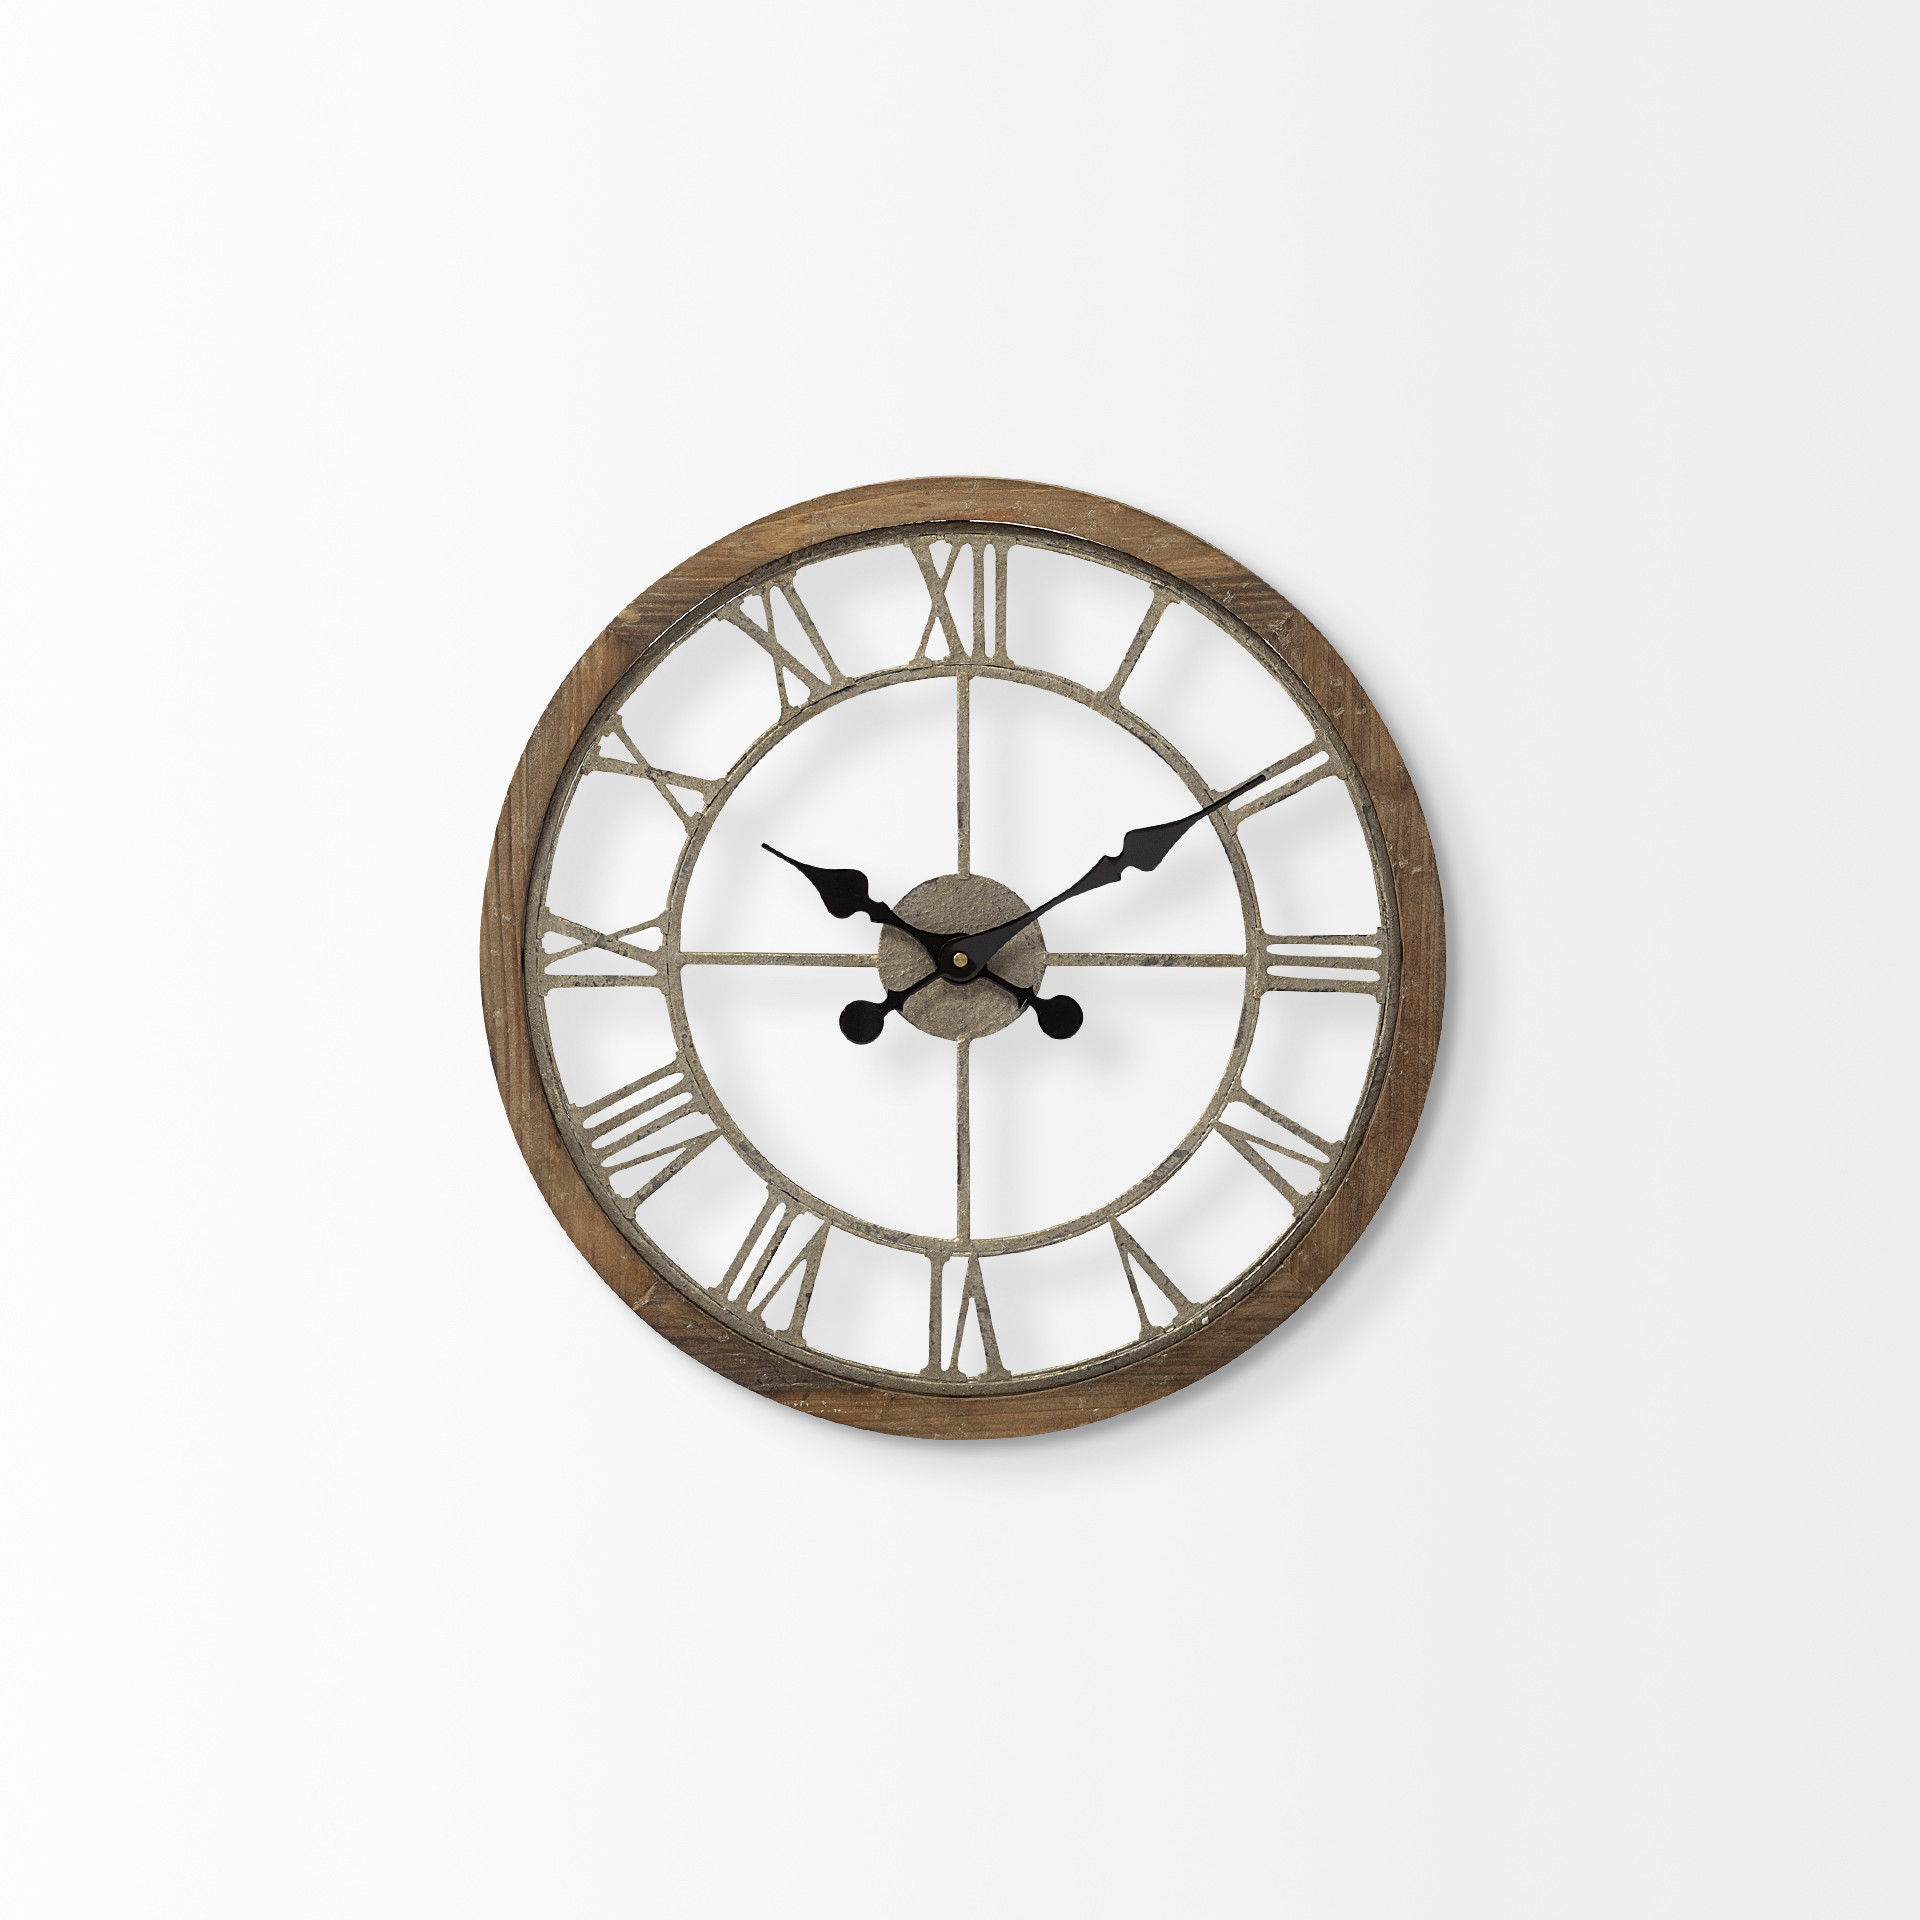 19" Large Brown Farmhouse Style Wall Clock